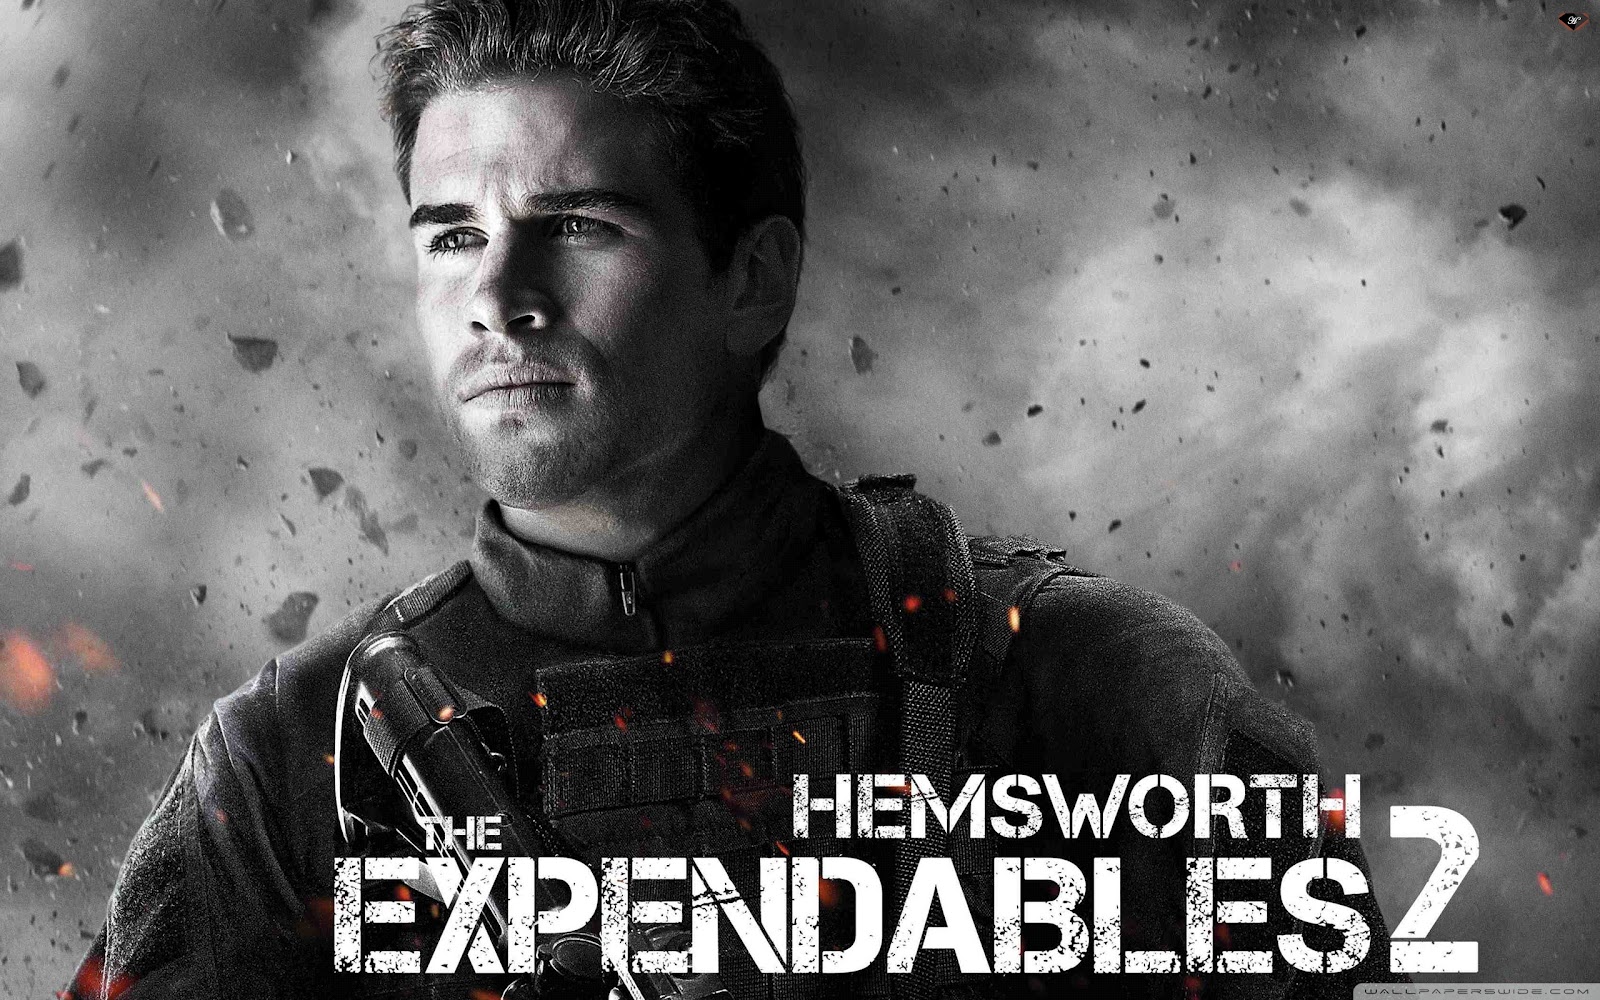 ... +expendables+2+hd+wallpapers+%2838%29 The Expendables 2 HD Wallpapers